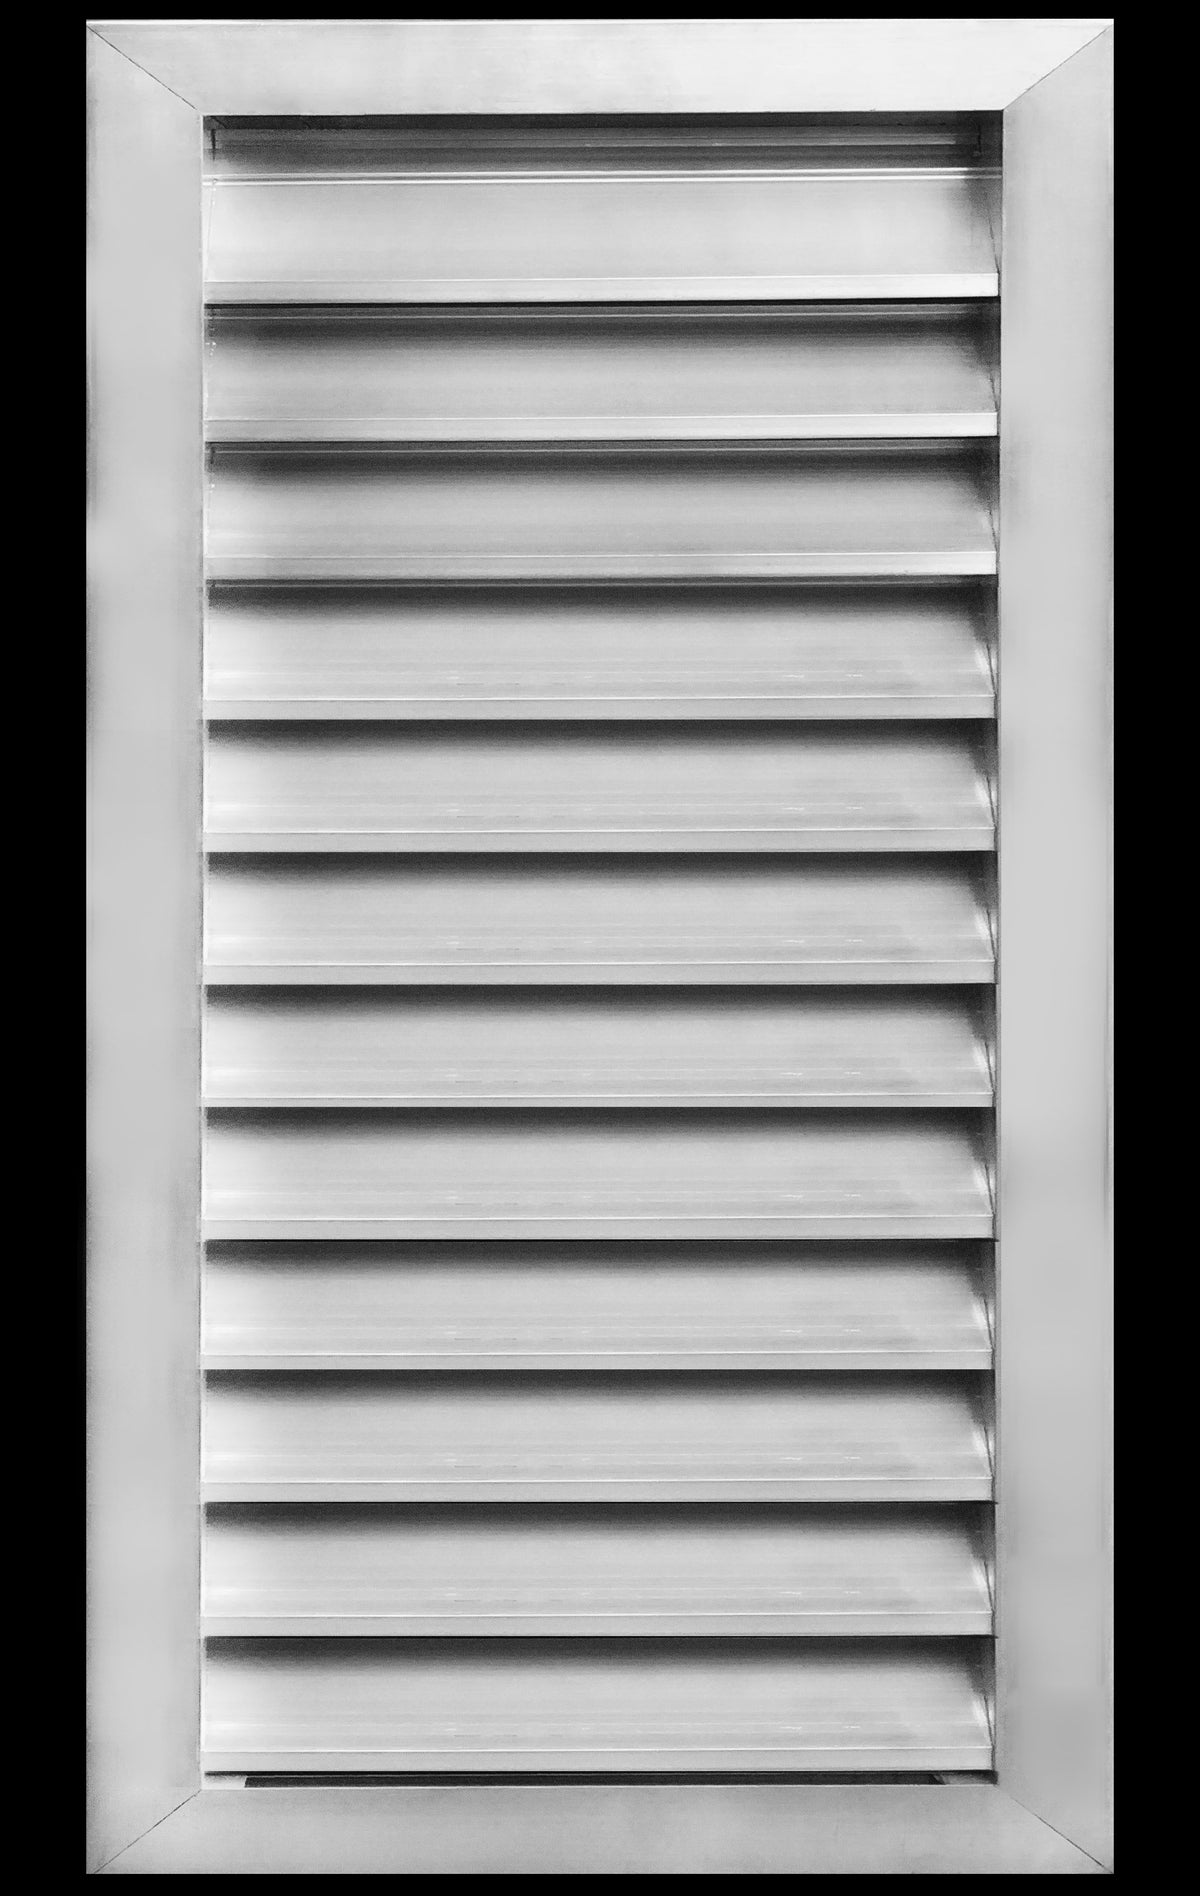 14&quot;w X 26&quot;h Aluminum Outdoor Weather Proof Louvers - Rain &amp; Waterproof Air Vent With Screen Mesh